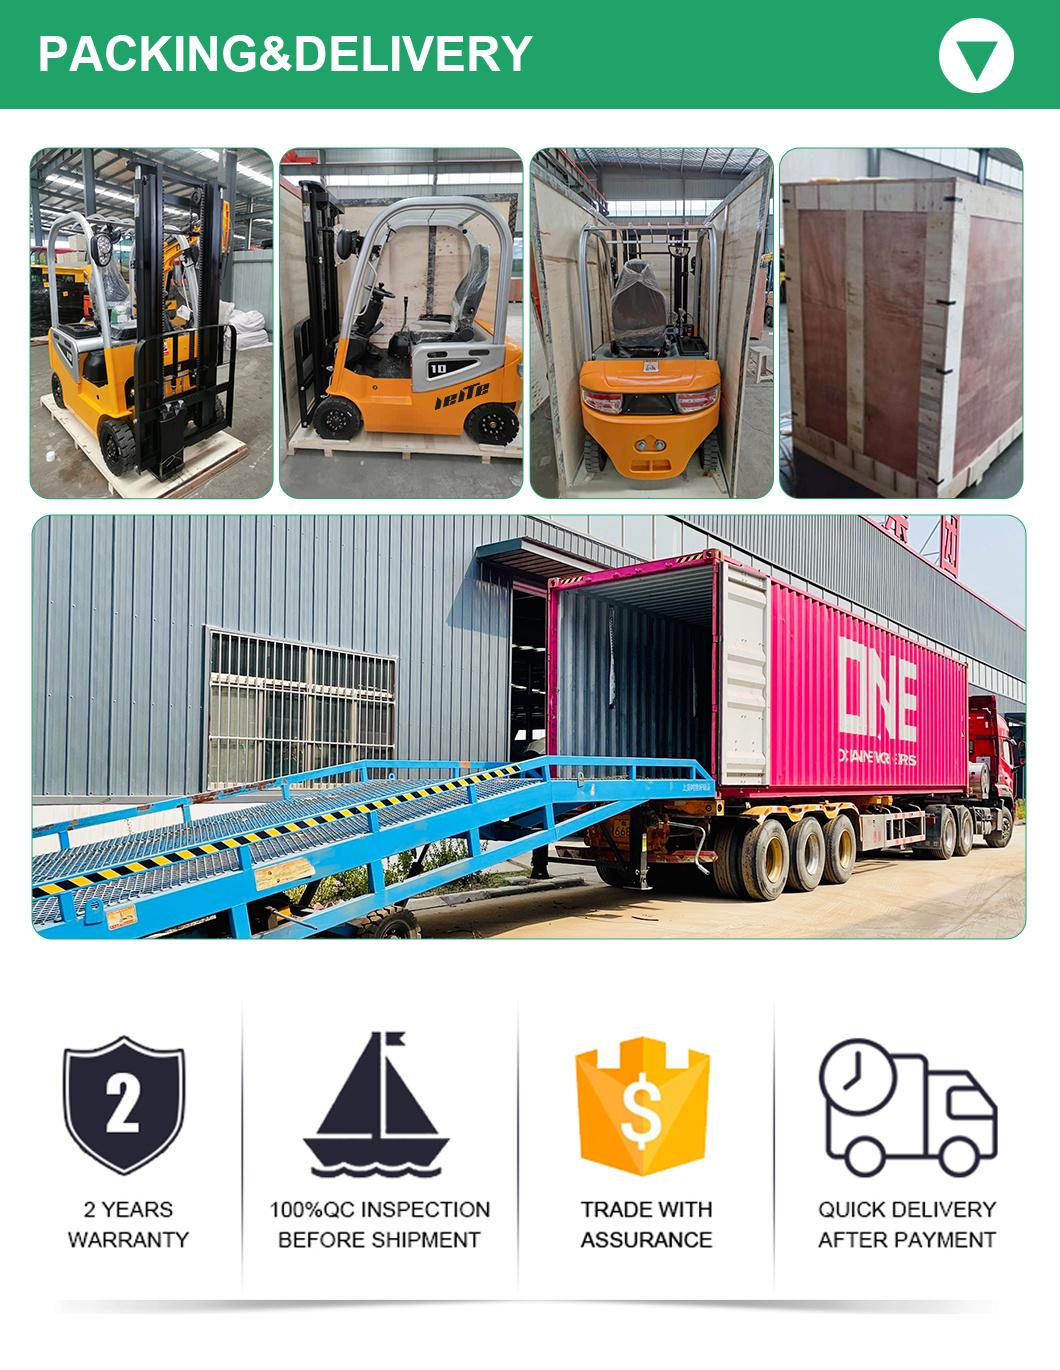 Forklift Truck Electric Forklift Rough Terrain Forklift 1 Ton 2 Ton 3 Ton with Attachment Price